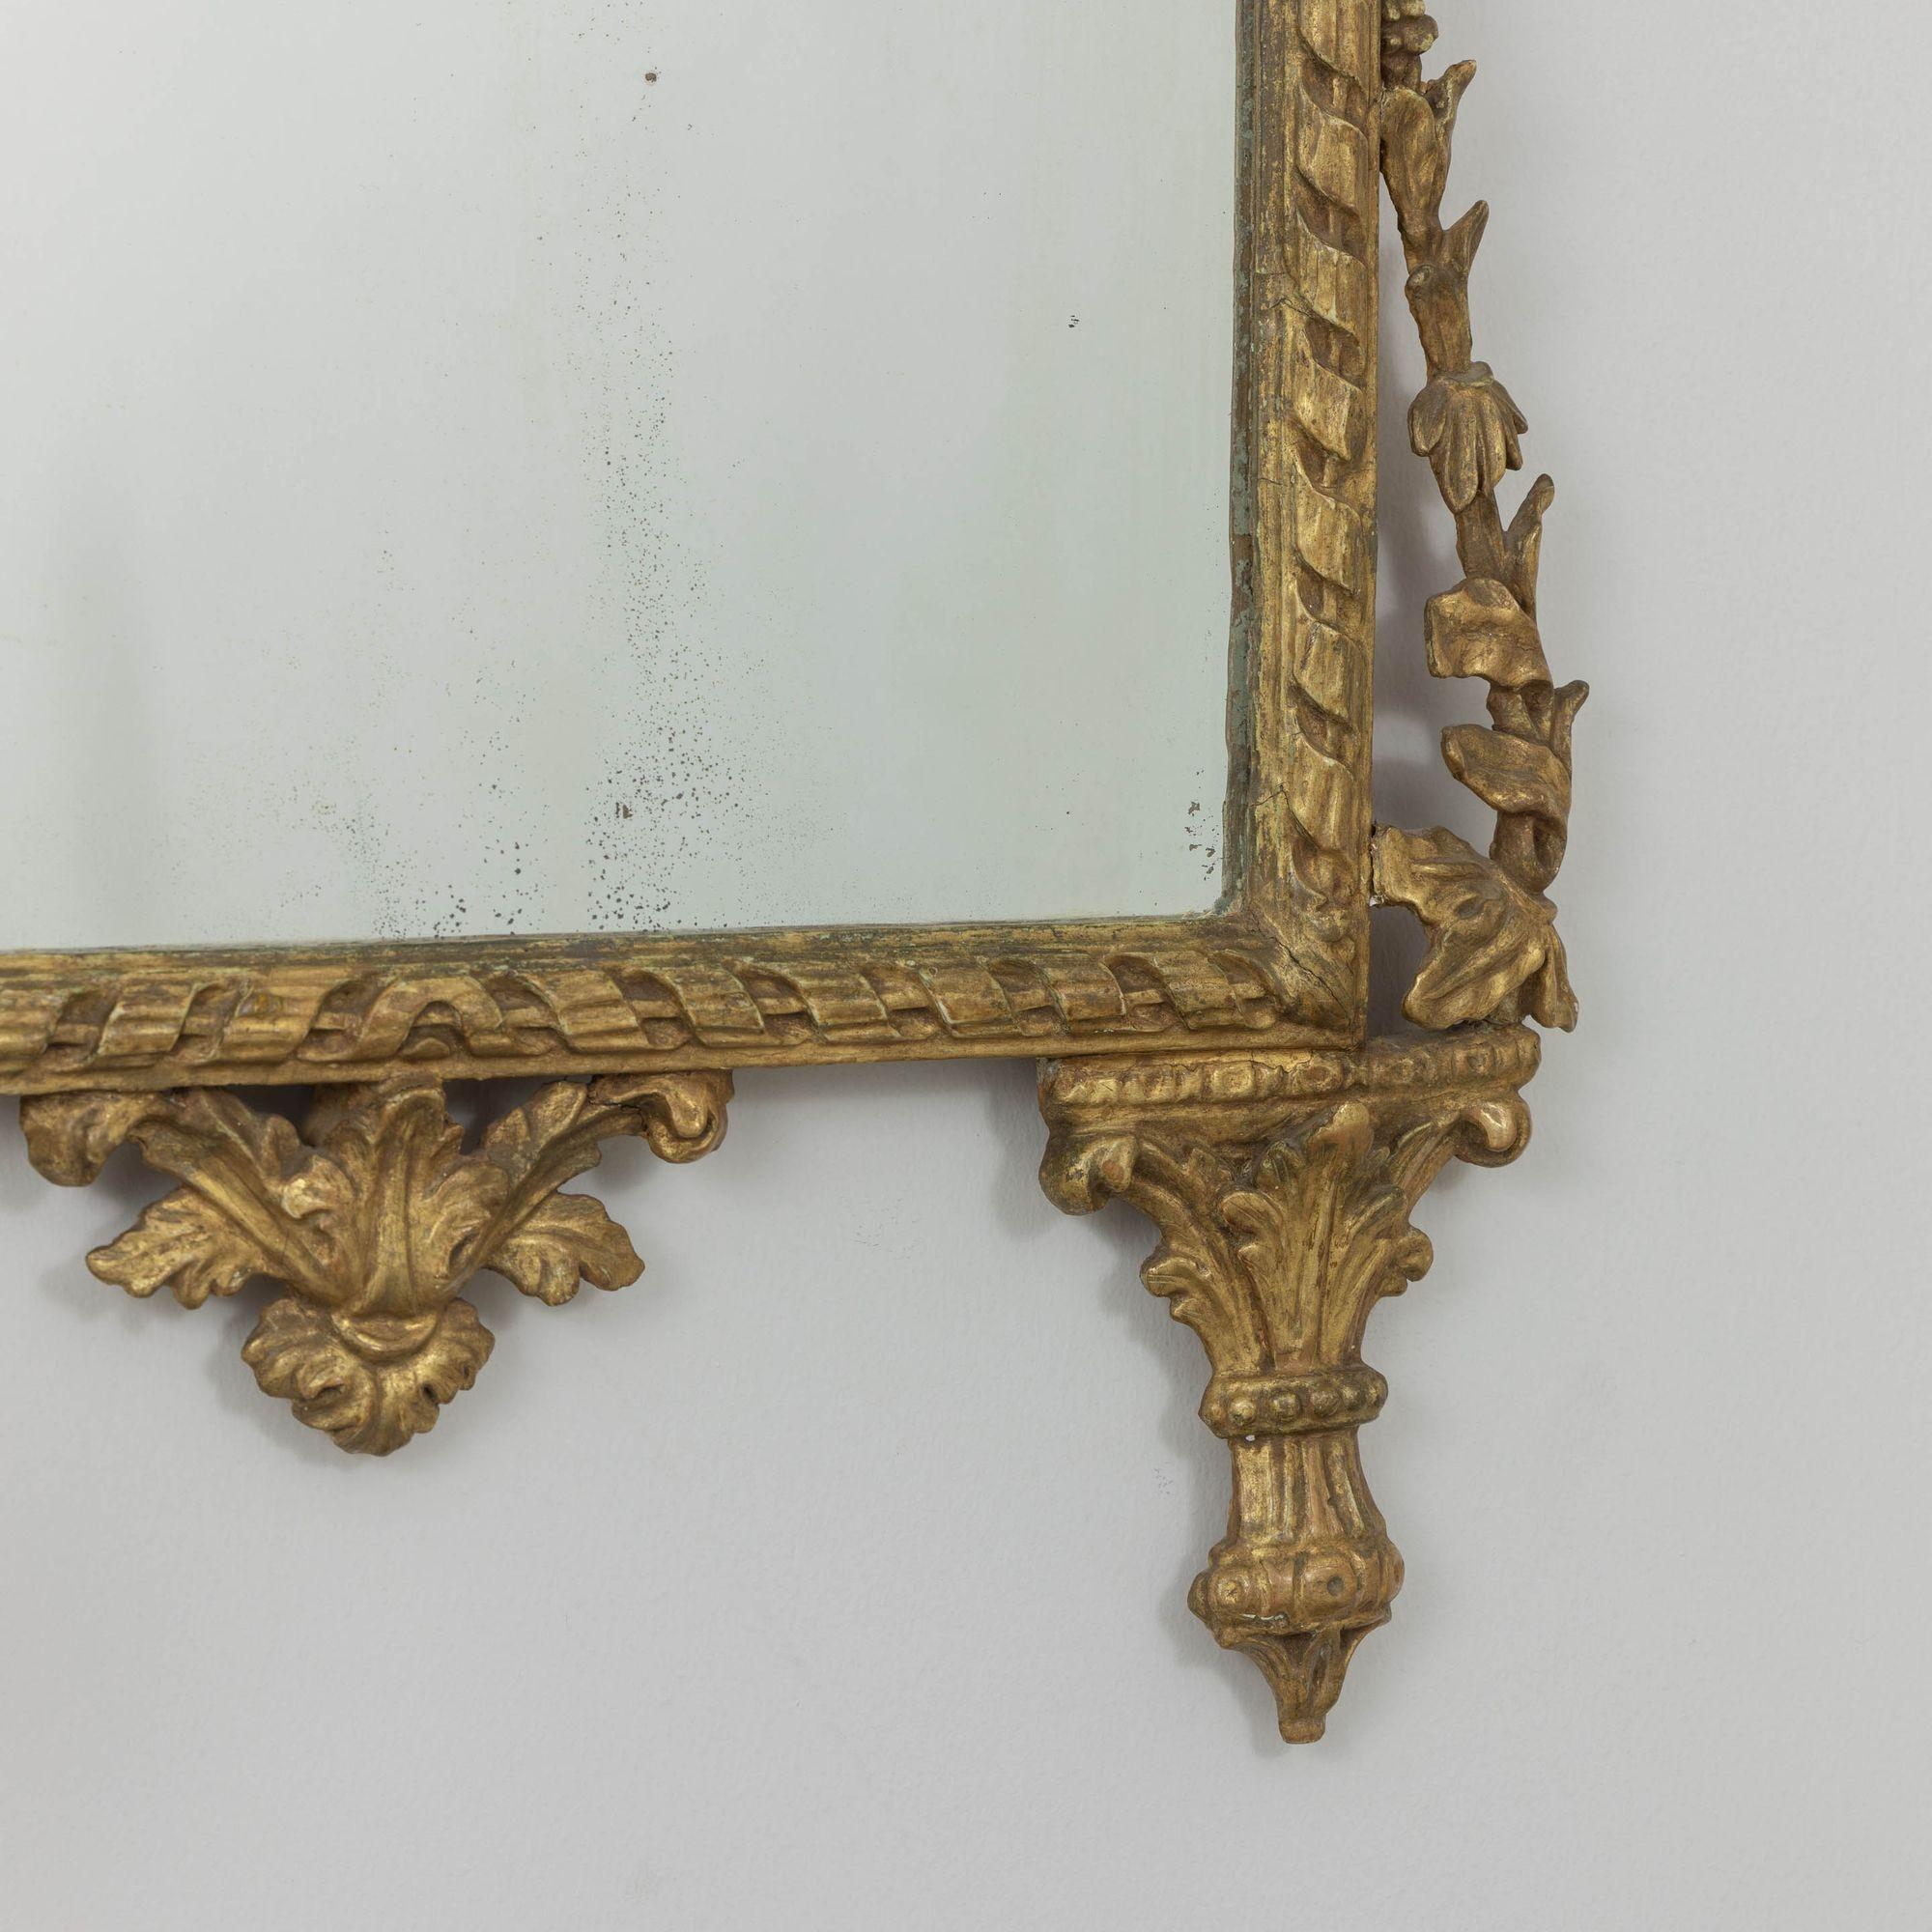 19th c. Italian Giltwood Mirror with Original Mirror Plate For Sale 9